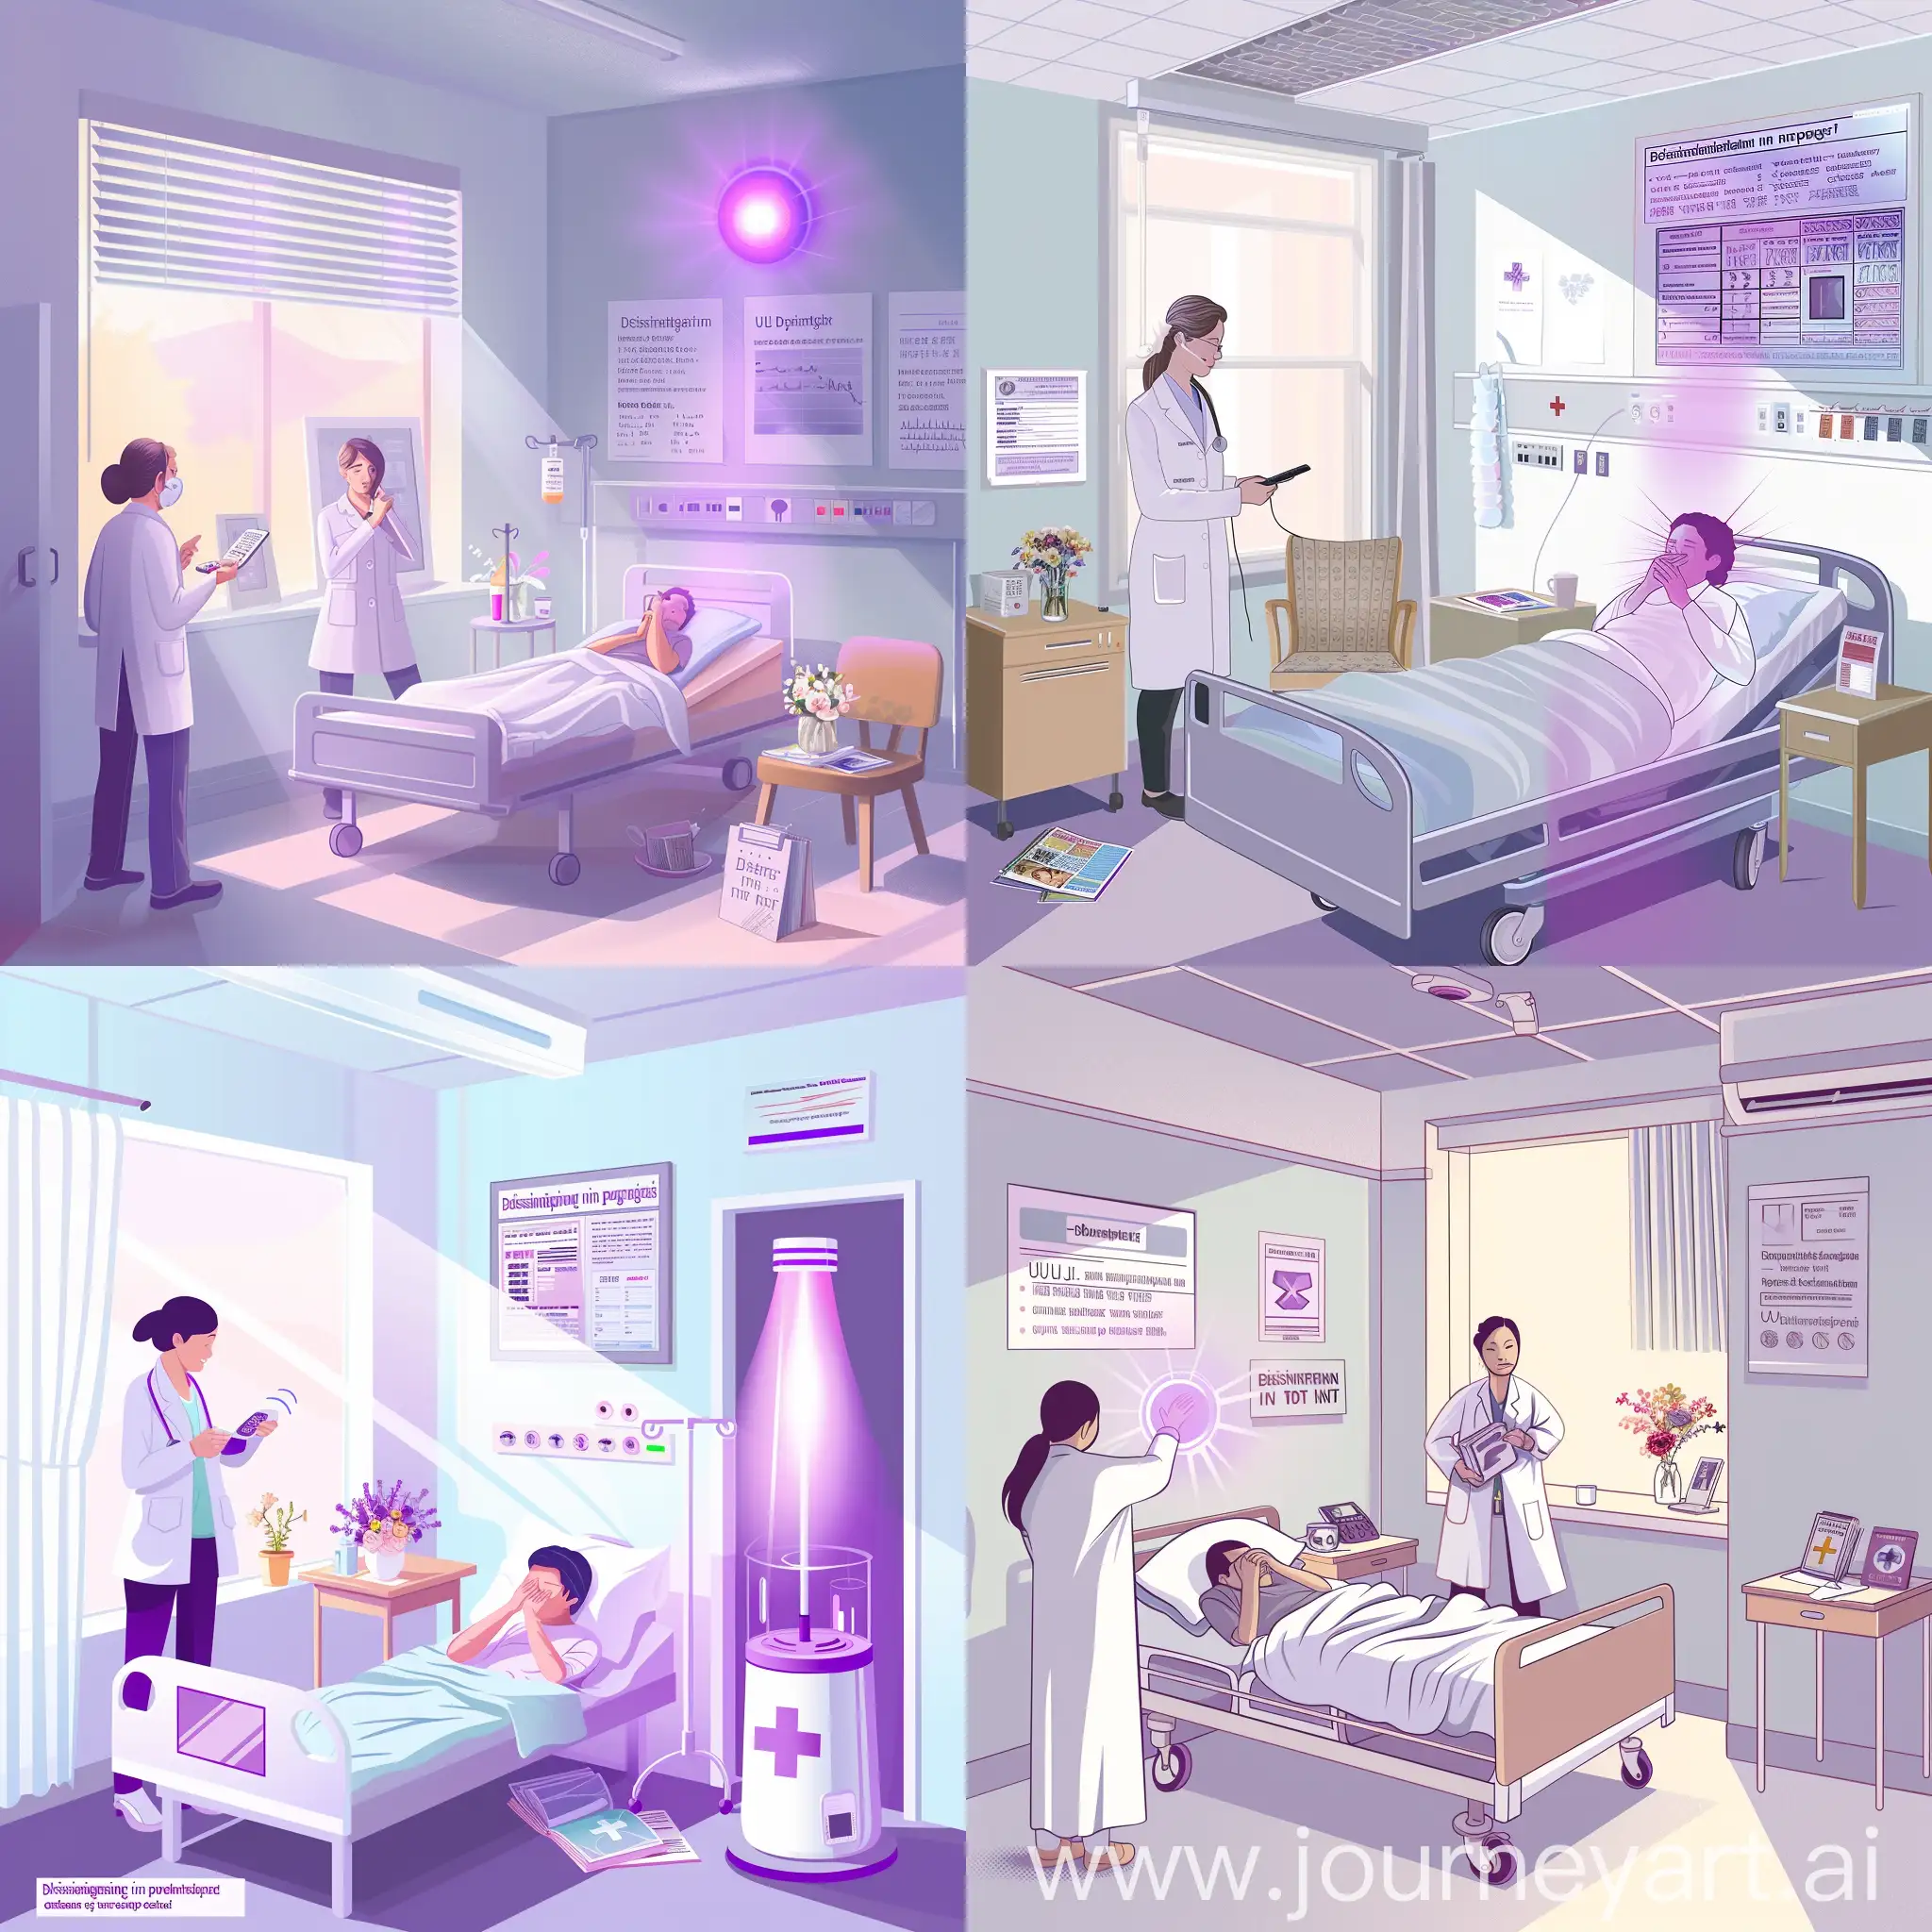 Hospital-Ward-Scene-Doctor-Explains-UV-Disinfection-Process-to-Patient